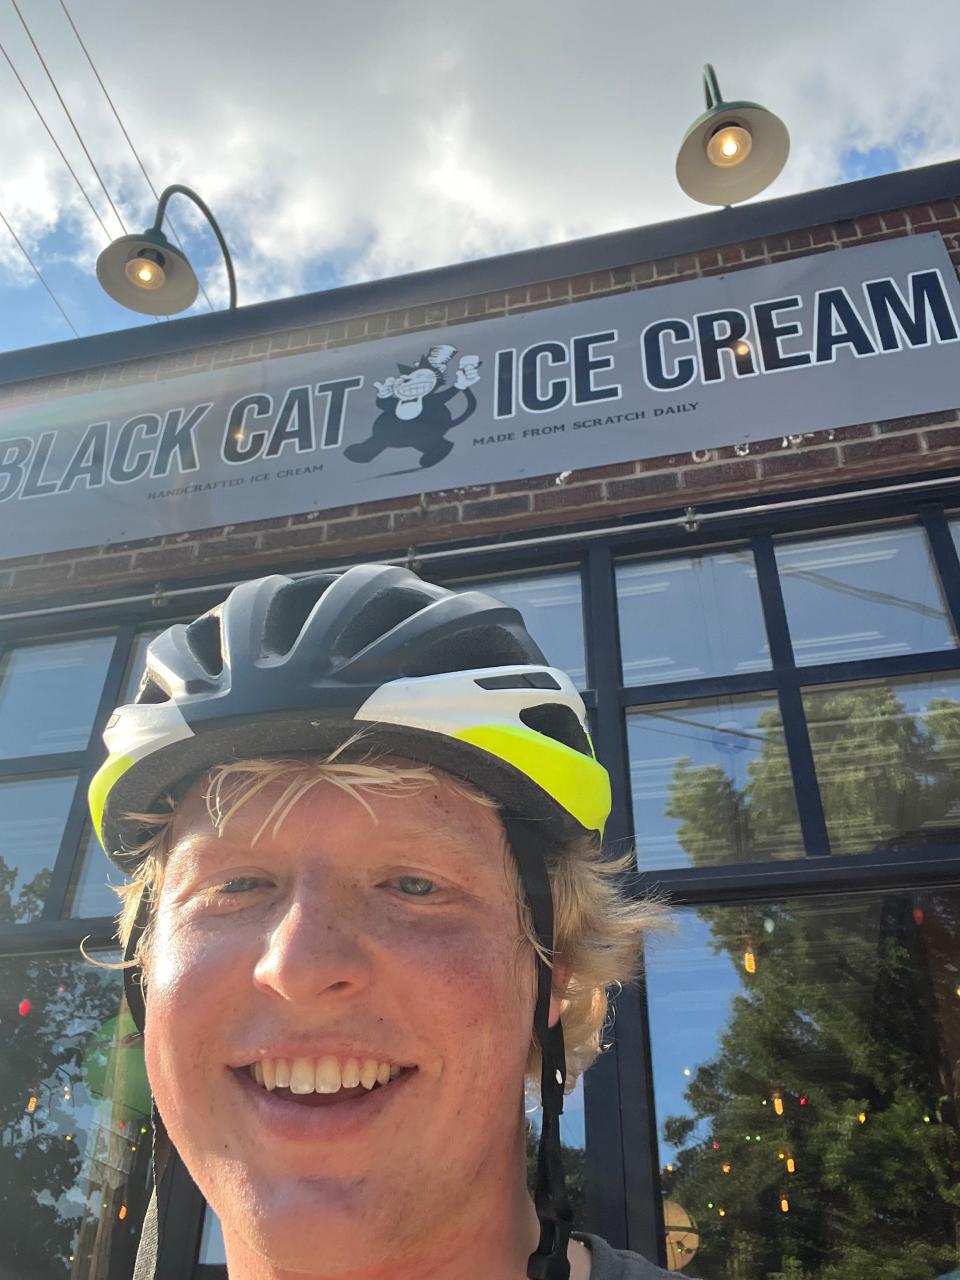 James Douthit takes a selfie in front of Black Cat Ice Cream in Des Moines.